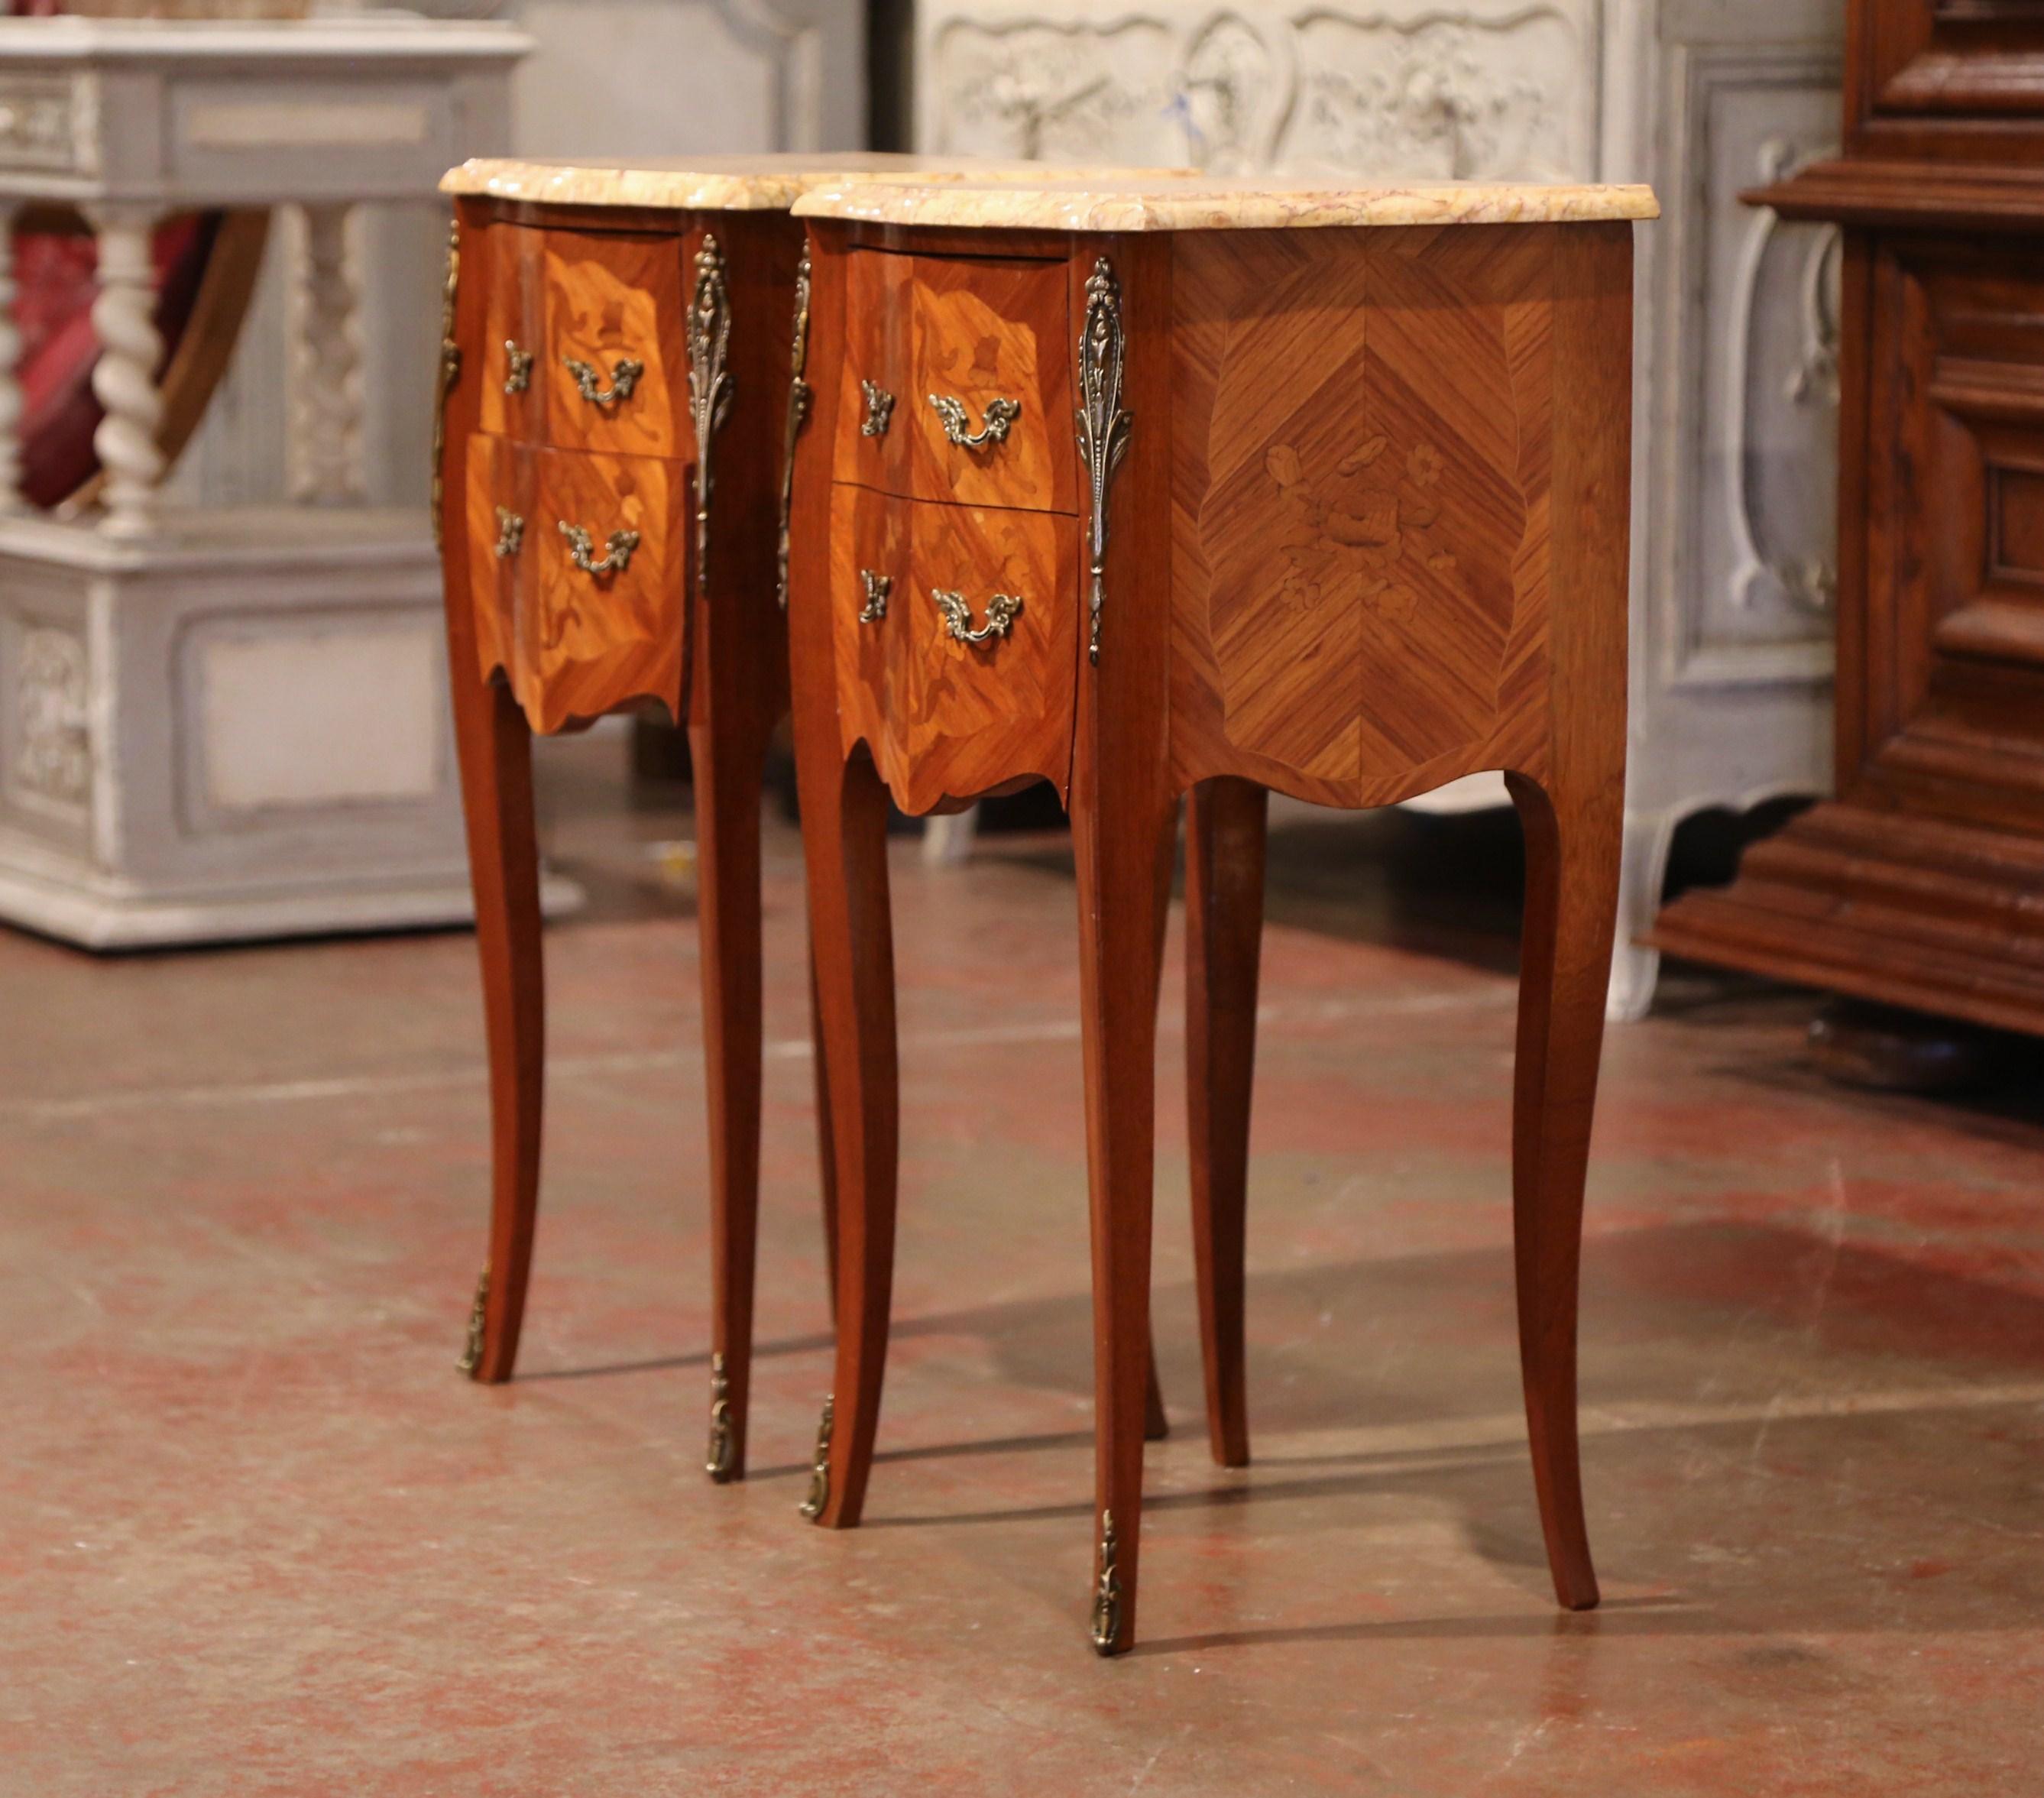 These elegant bedside tables were created in France, circa 1950. Bombe in shape on all three sides, the fruitwood cabinets stand on long cabriole legs with decorative brass sabot feet; both sides with serpentine shape have an inlay veneer chevron